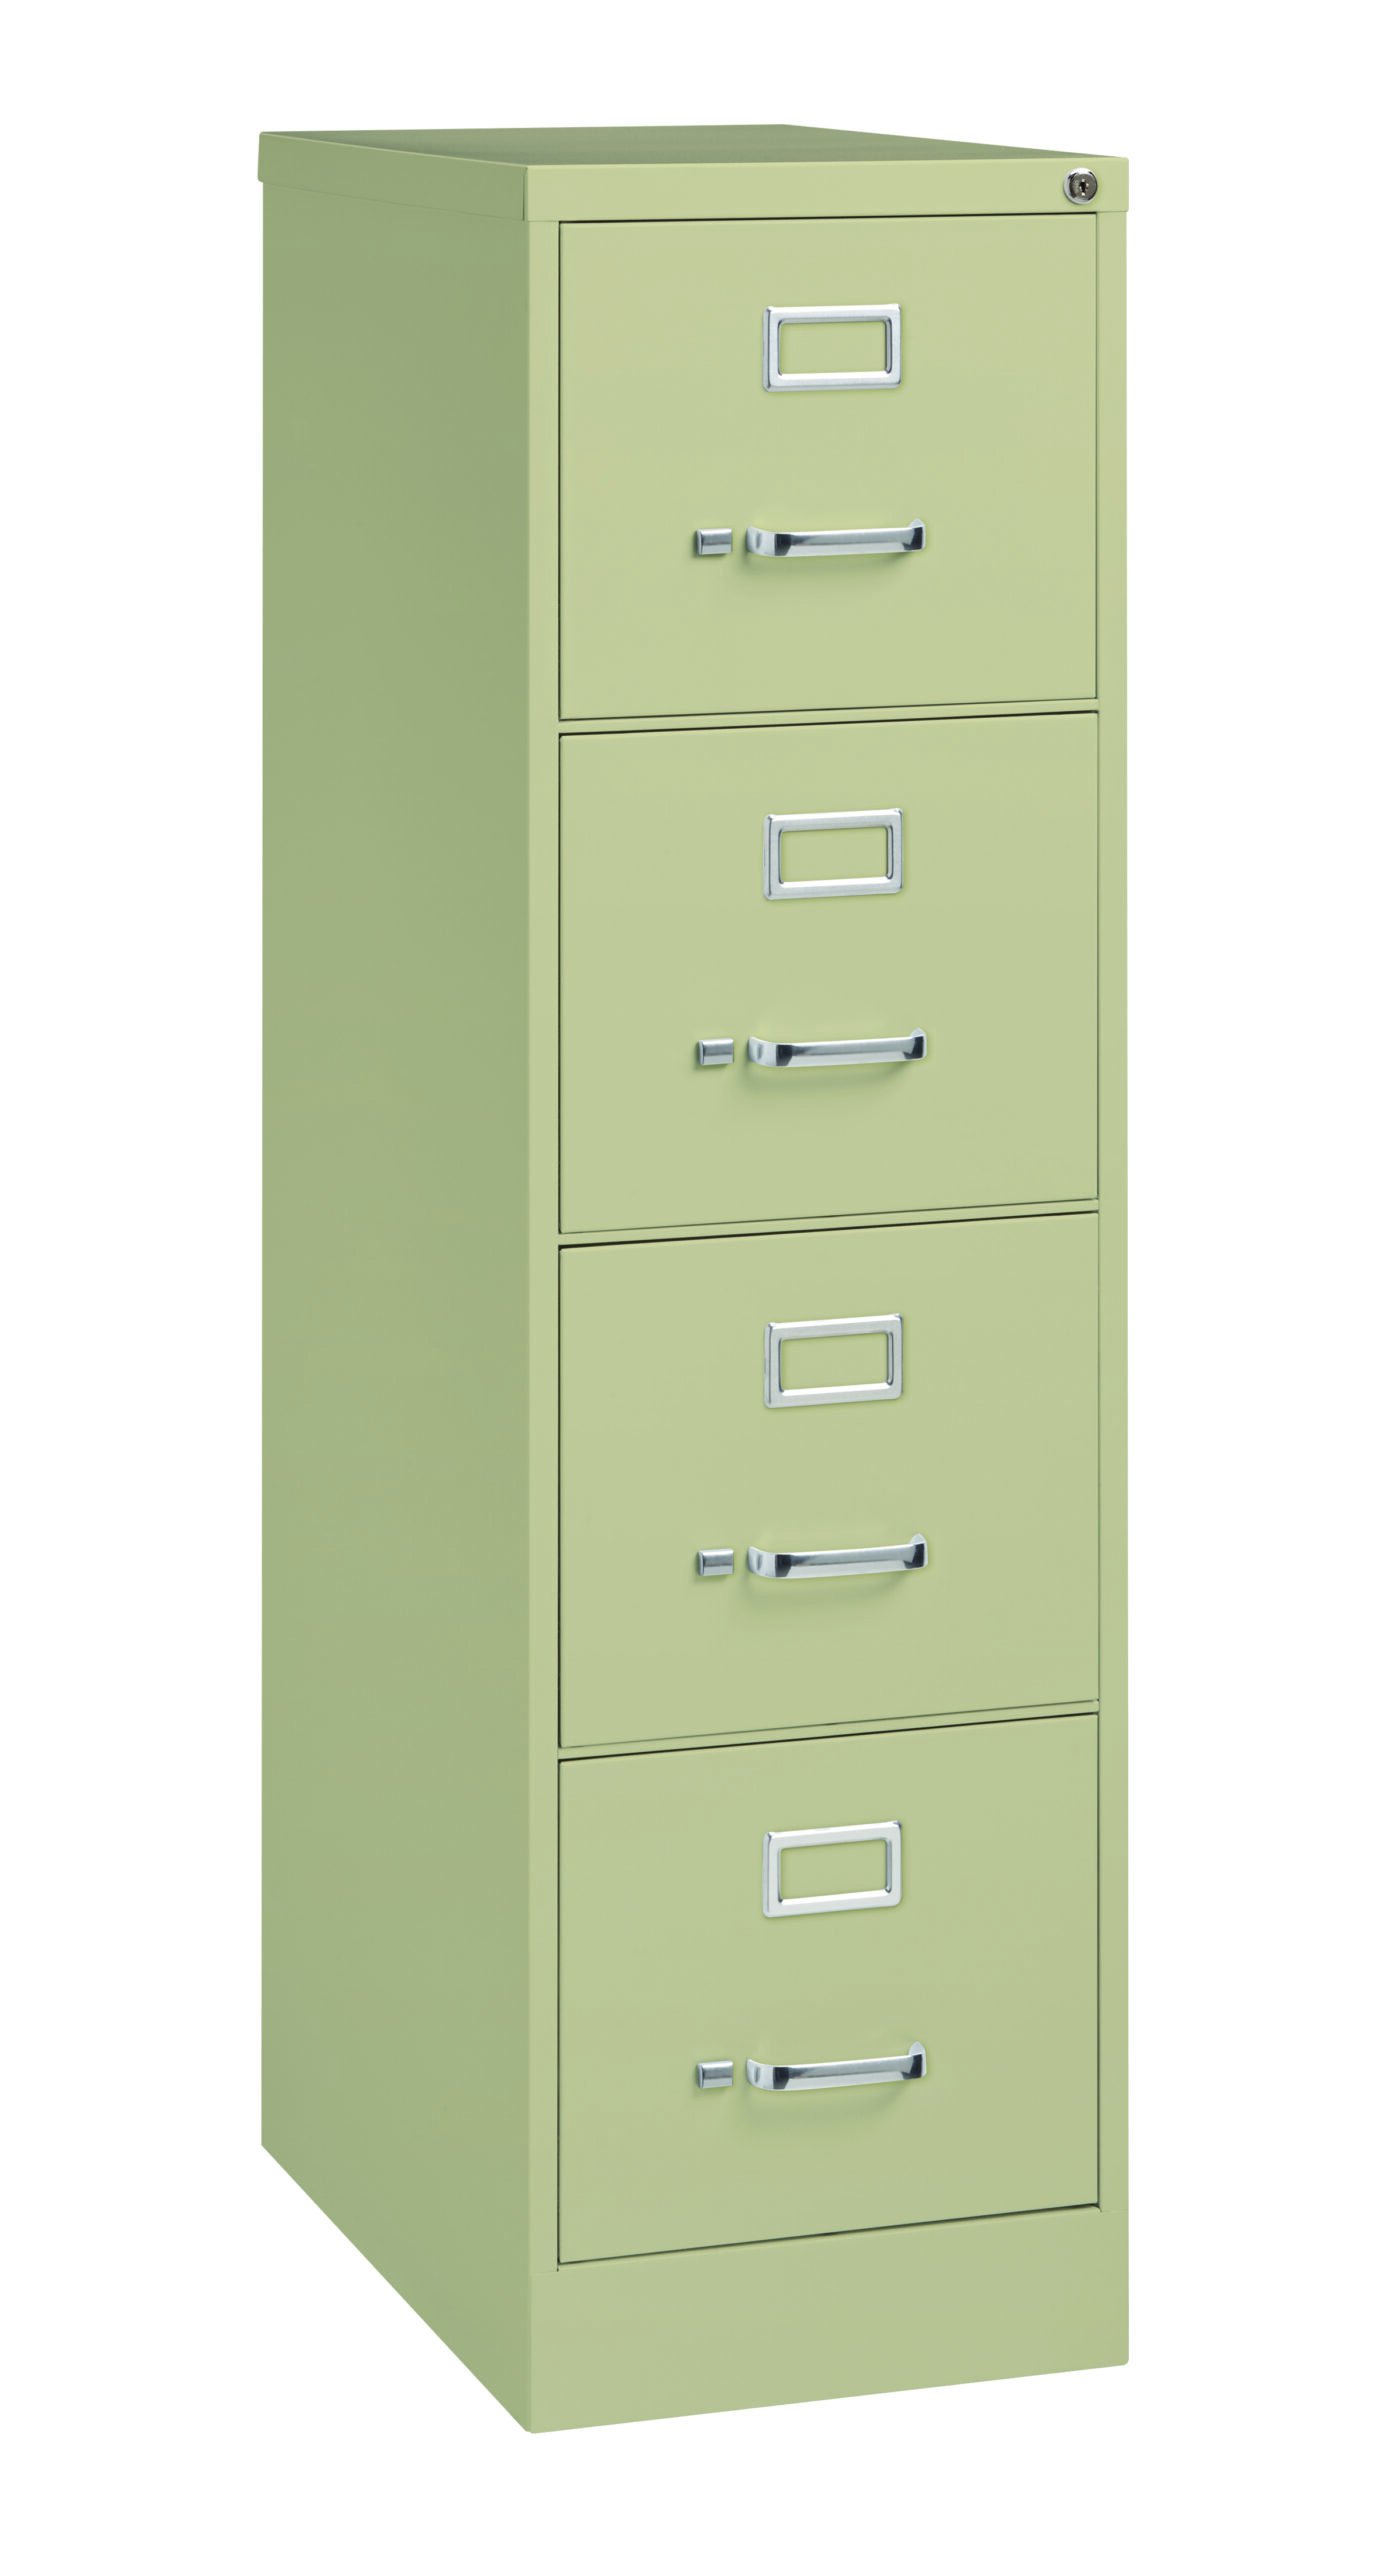 Hirsh 2500 25" Deep 4 Drawer Vertical File Cabinet in Putty 